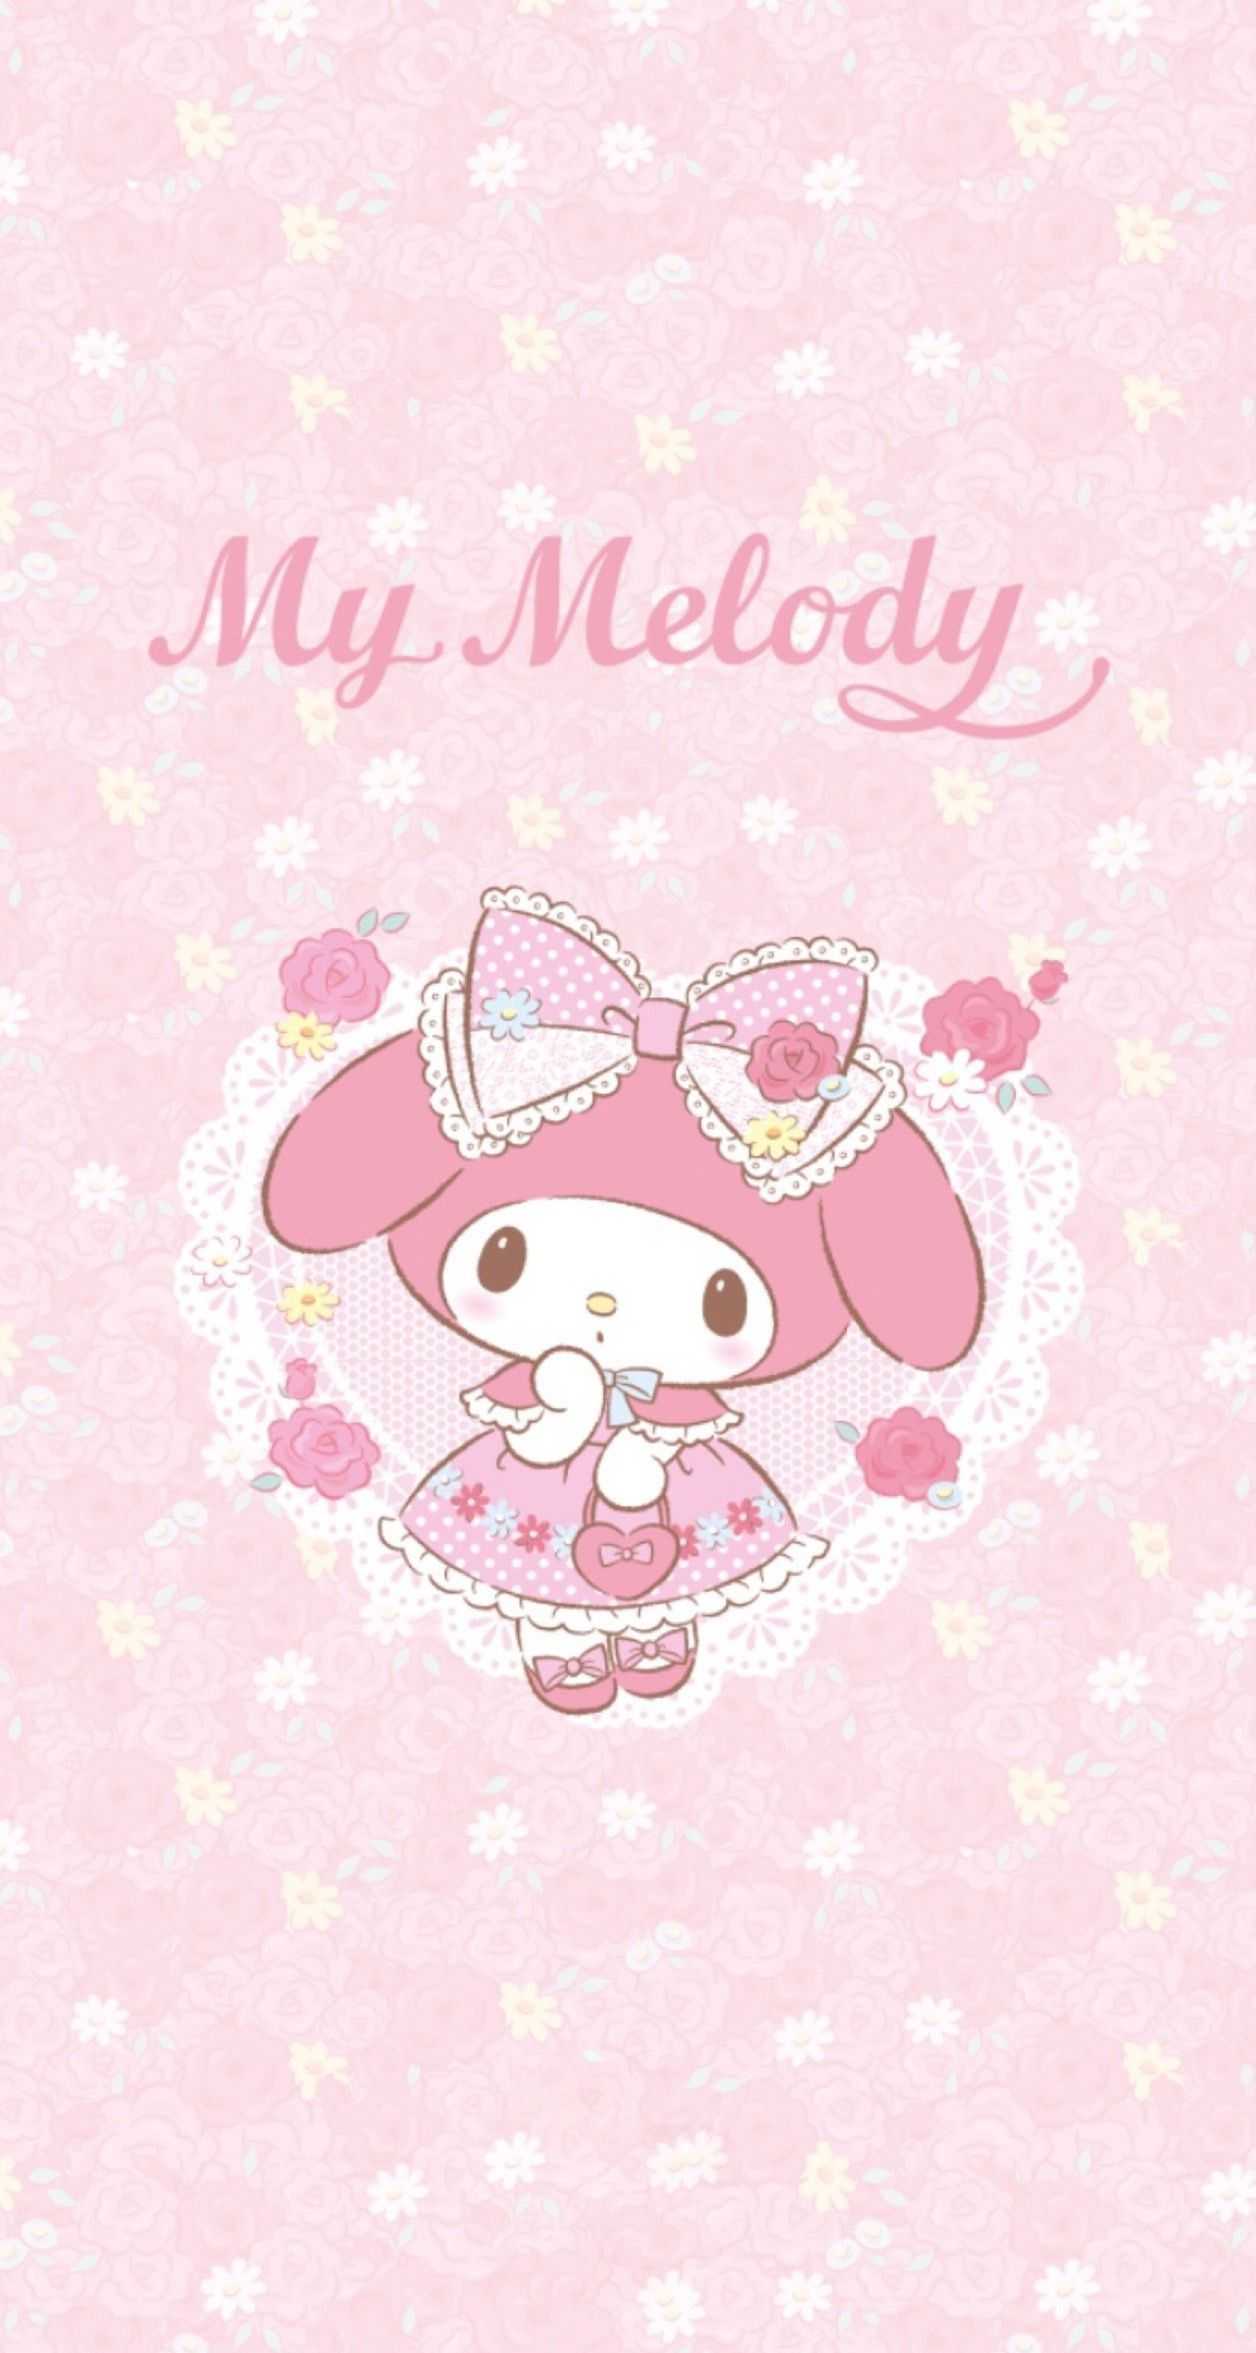 My Melody wallpaper - My Melody